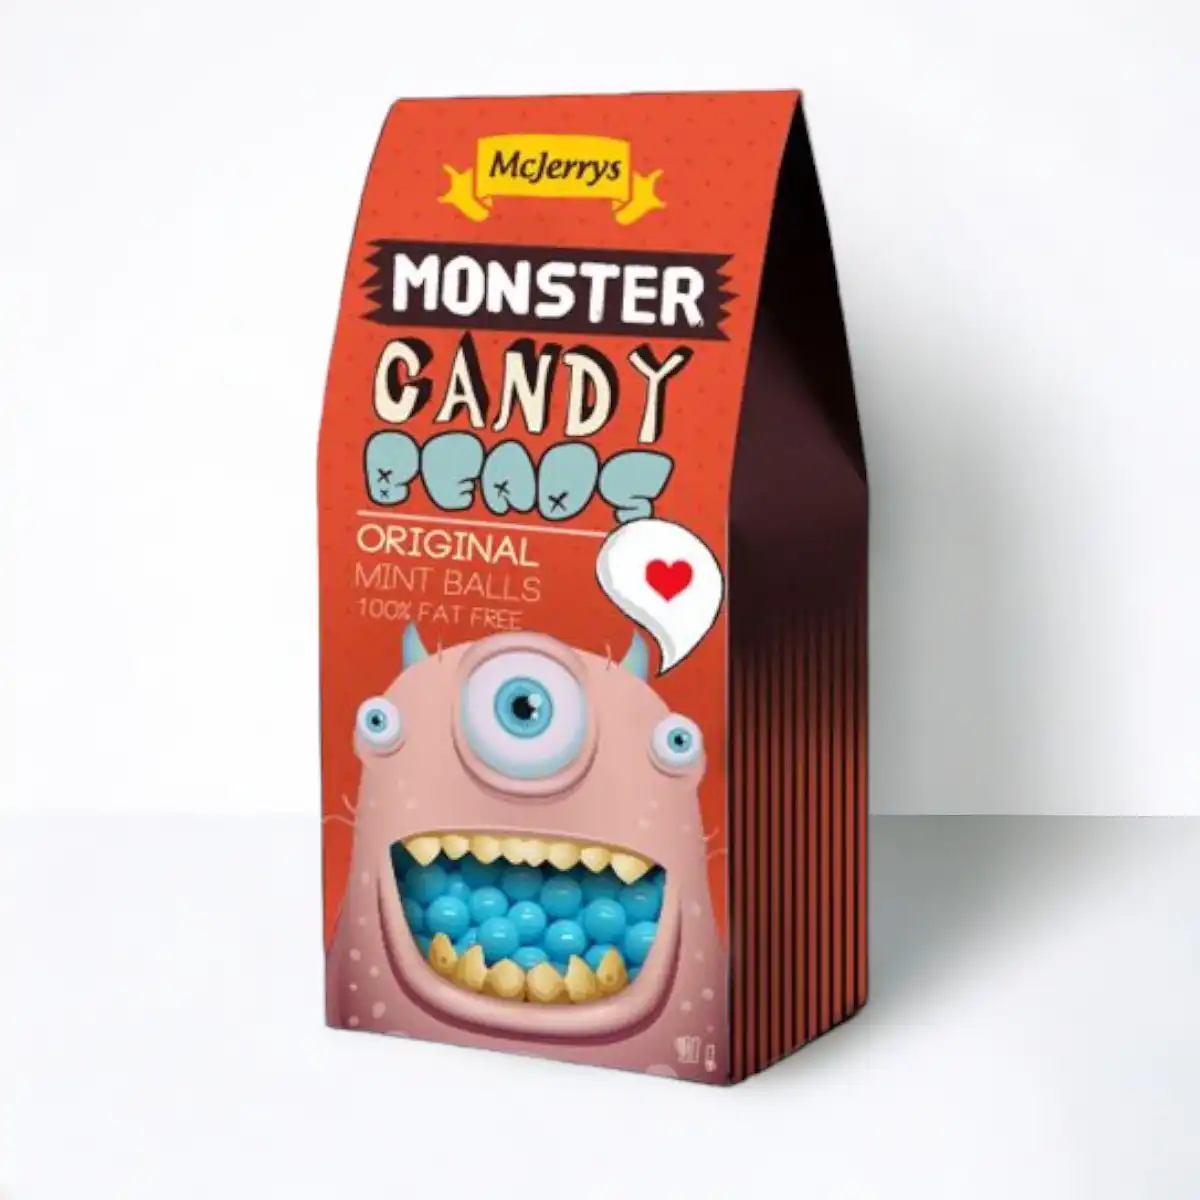 customized-candy-boxes